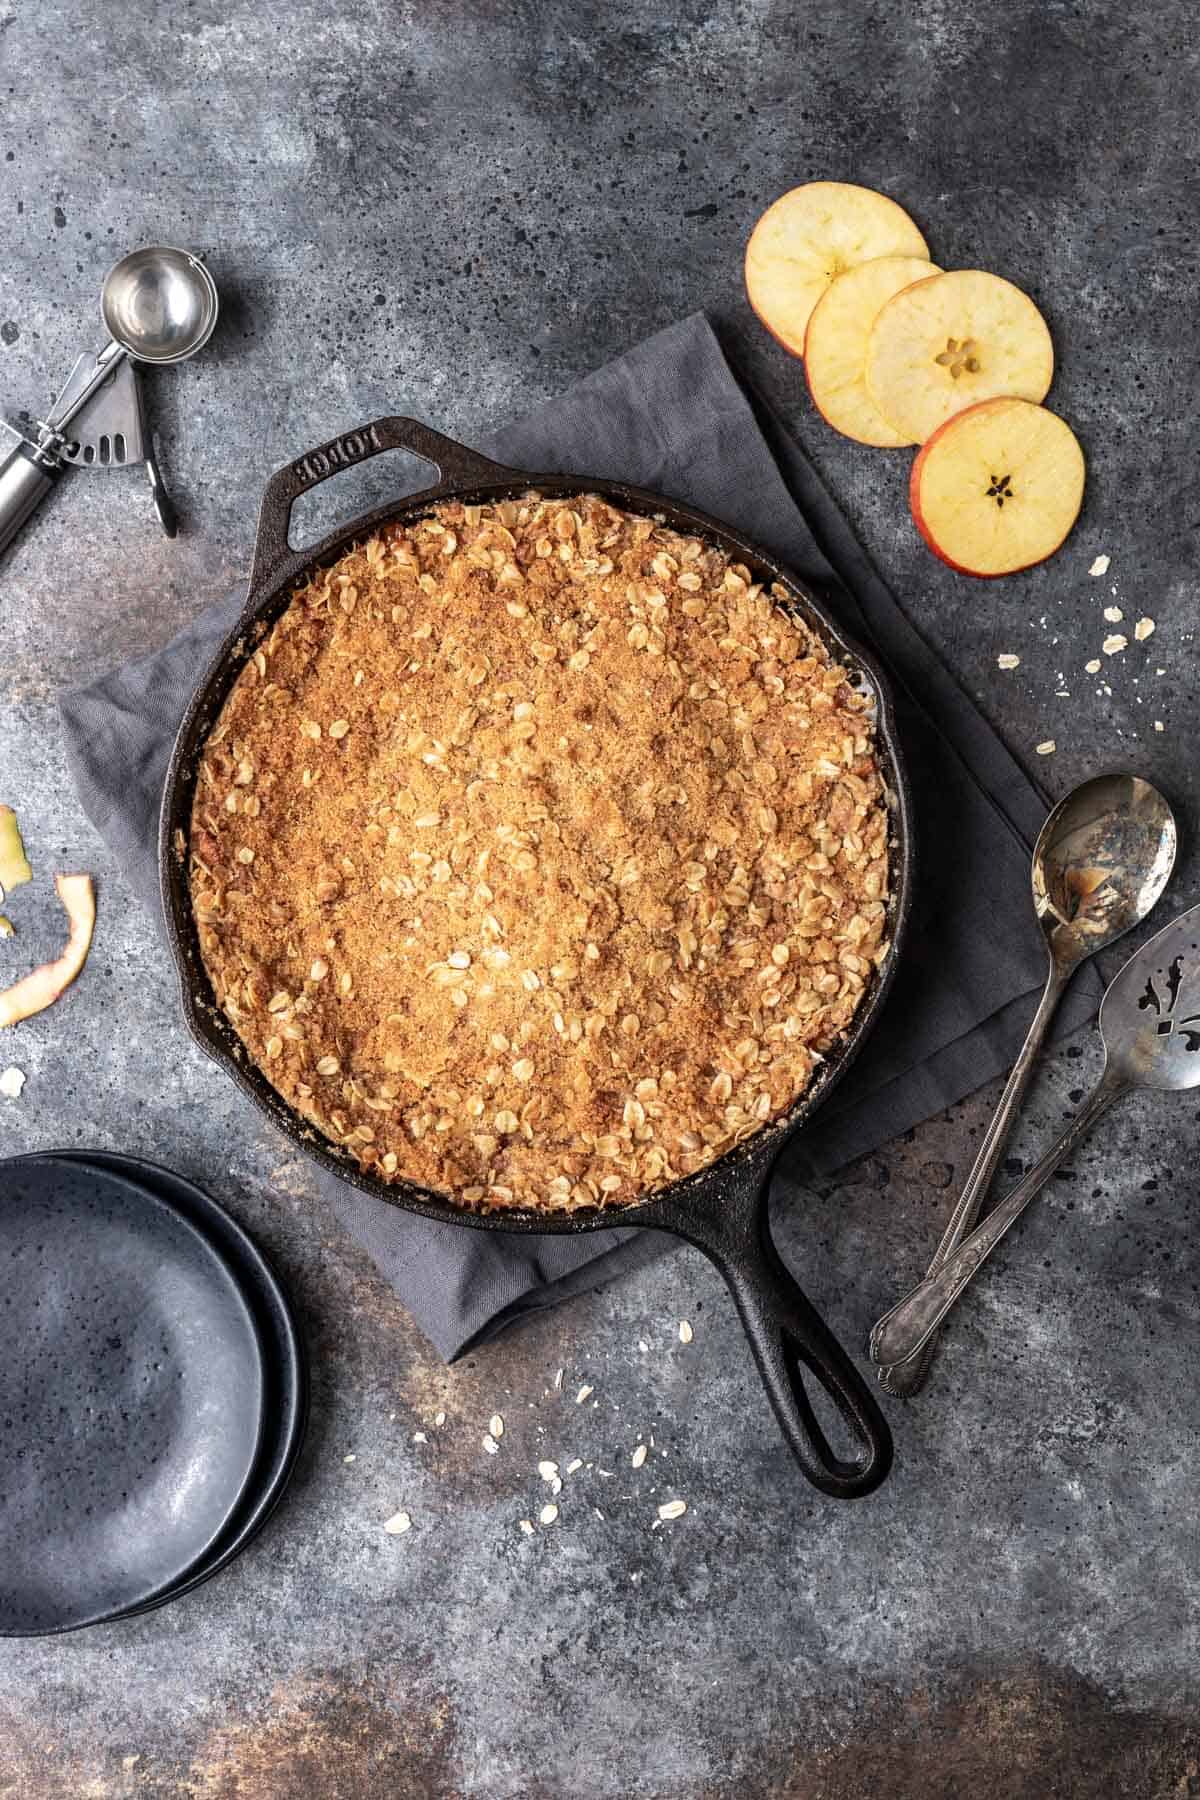 Golden brown apple crisp in a skillet with a side of sliced apples and serving plates.